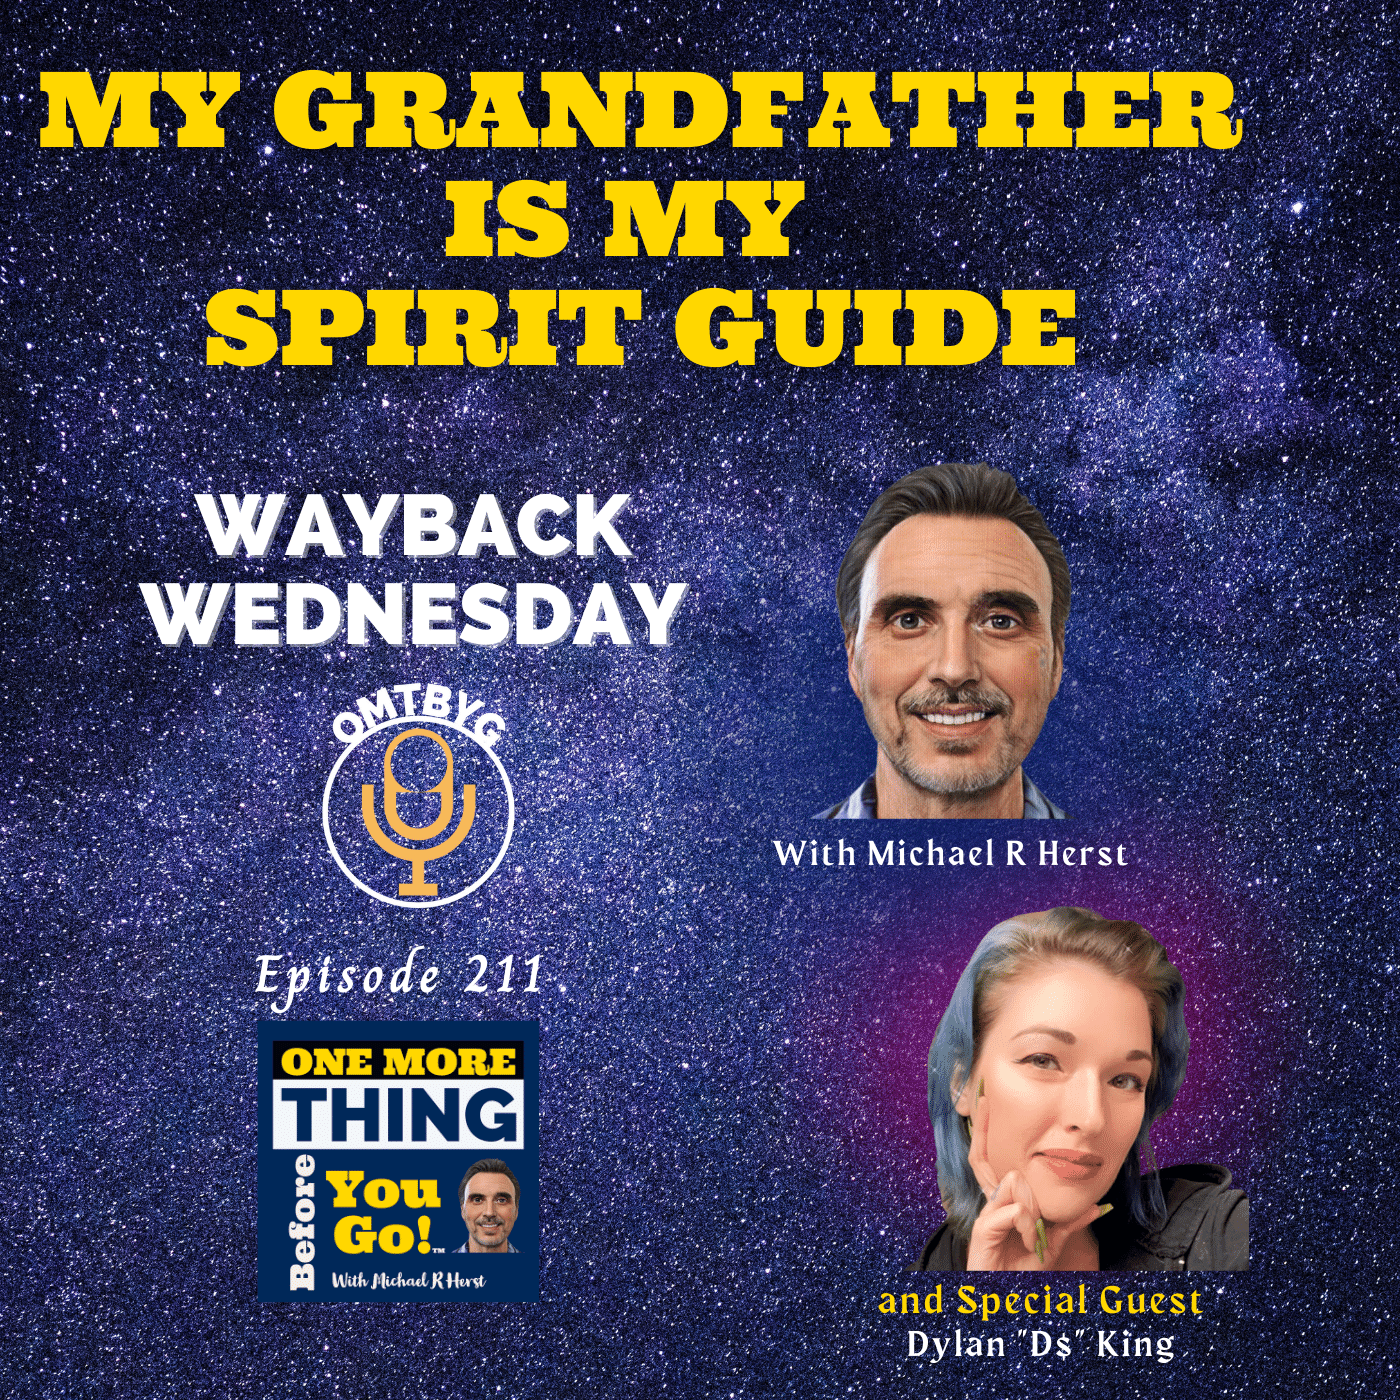 My Grandfather is My Spirit Guide - Wayback Wednesday Image